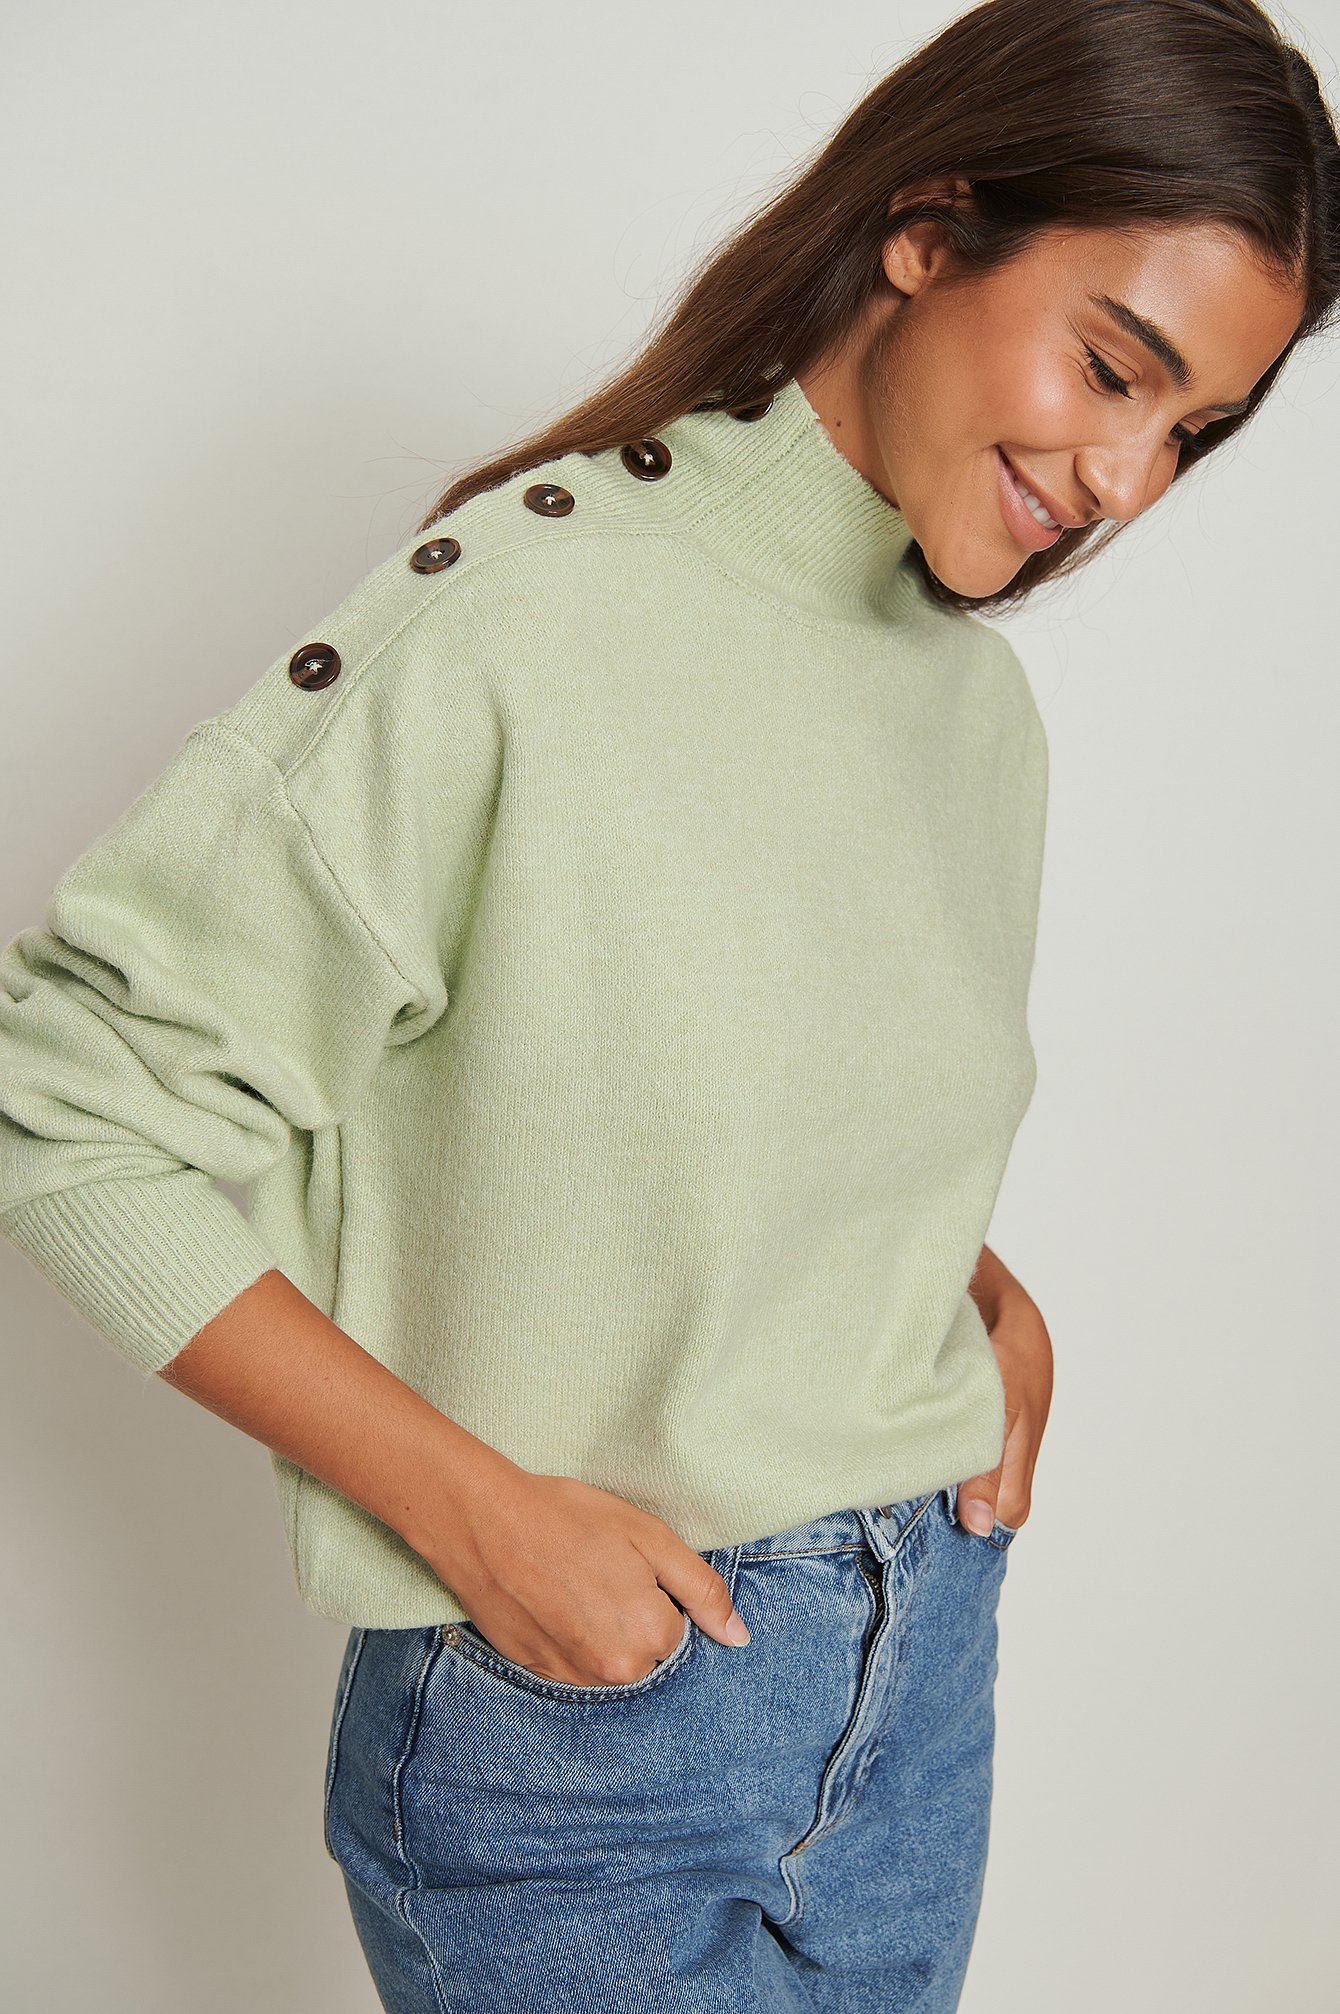 Mint Pullover mit Knopfdetail